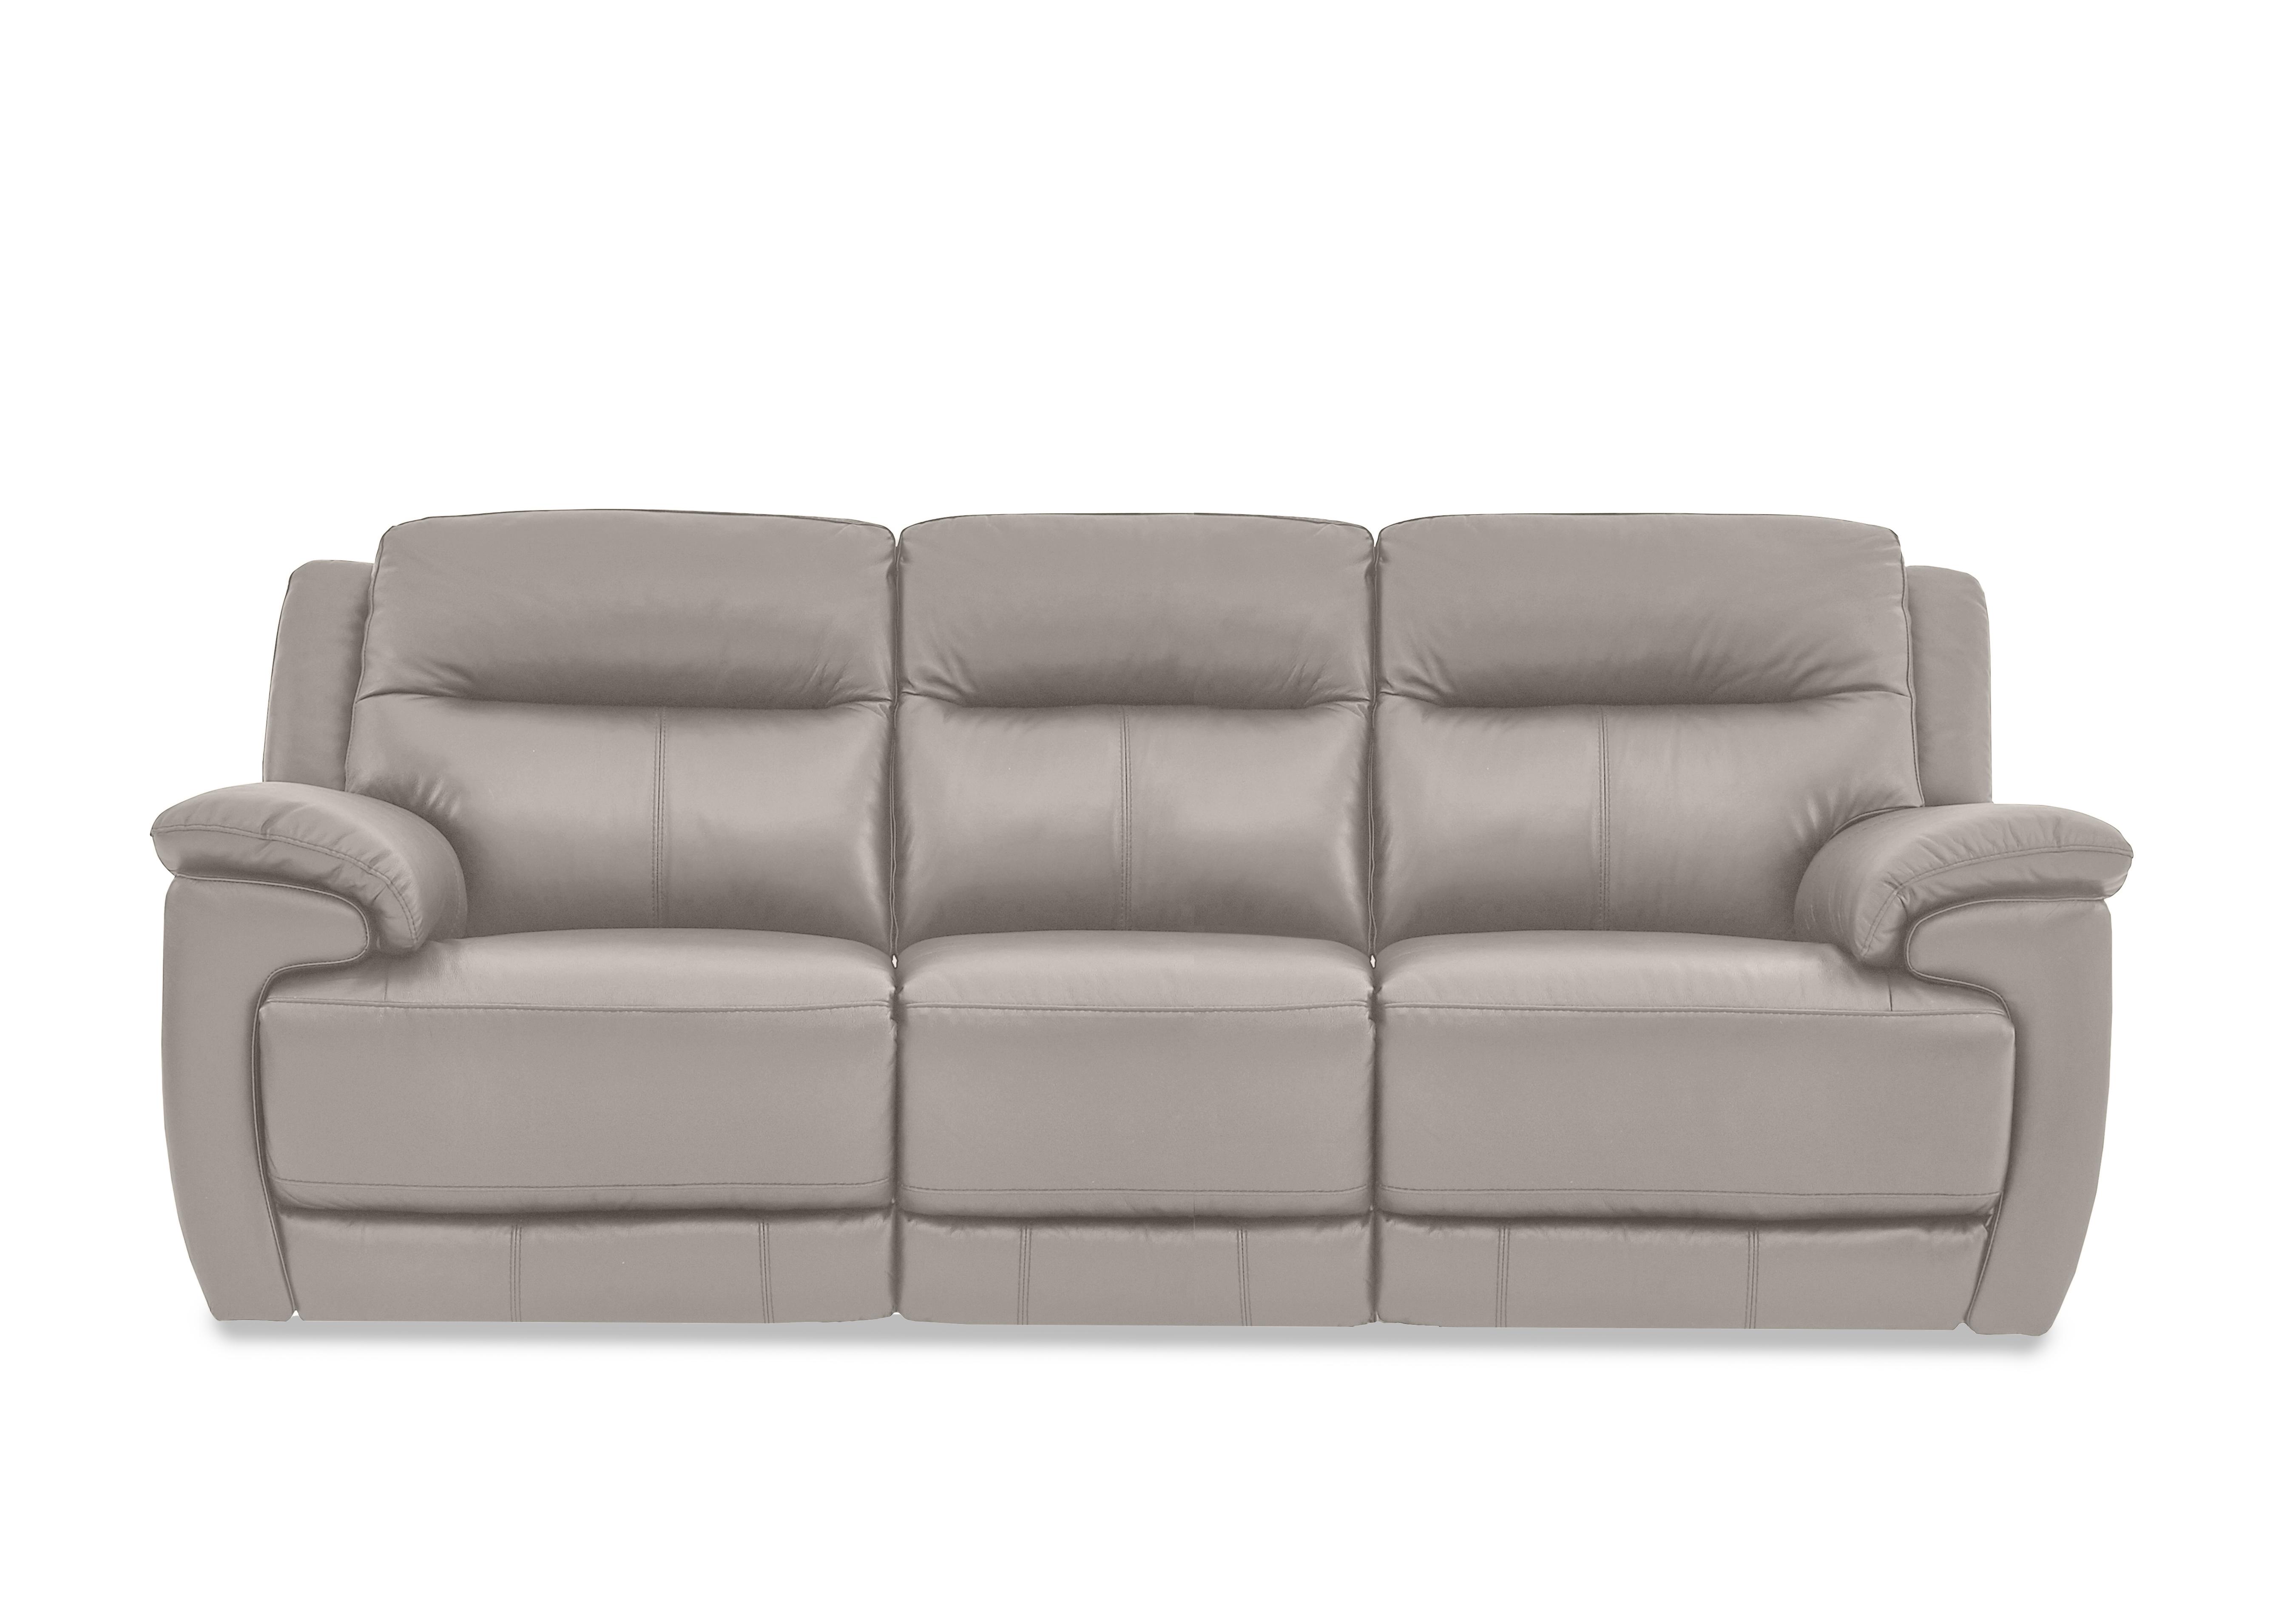 Touch 3 Seater Leather Sofa in Bv-946b Silver Grey on Furniture Village